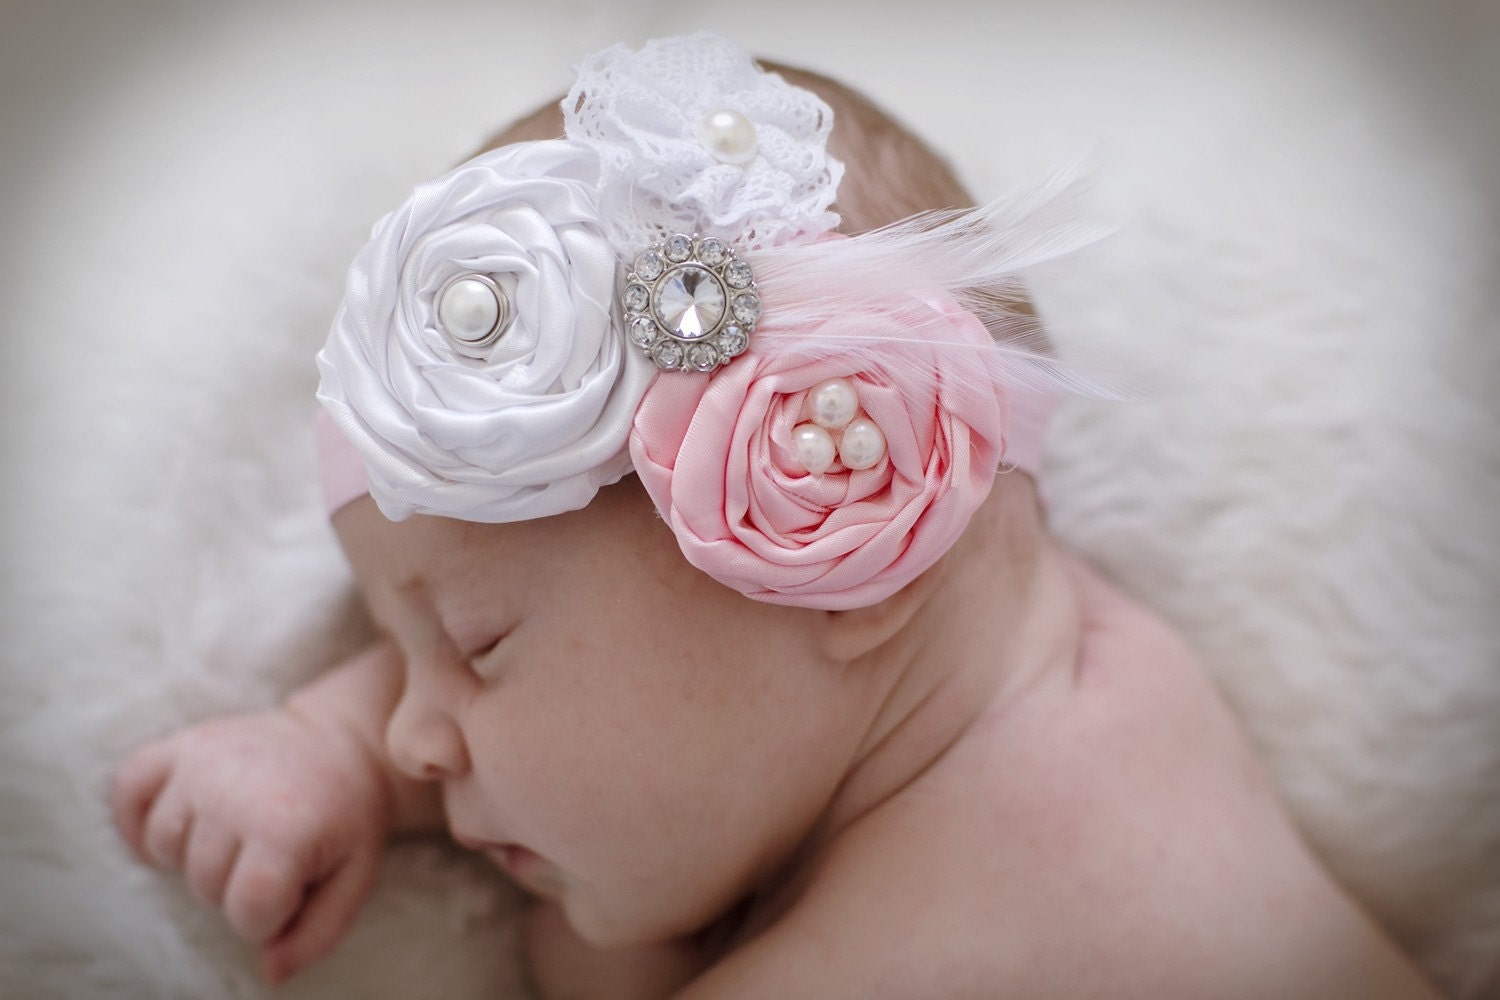 496 New baby headbands and bows 81 Hair bow .The Ella Grace vintage inspired baby by Ellasbows 